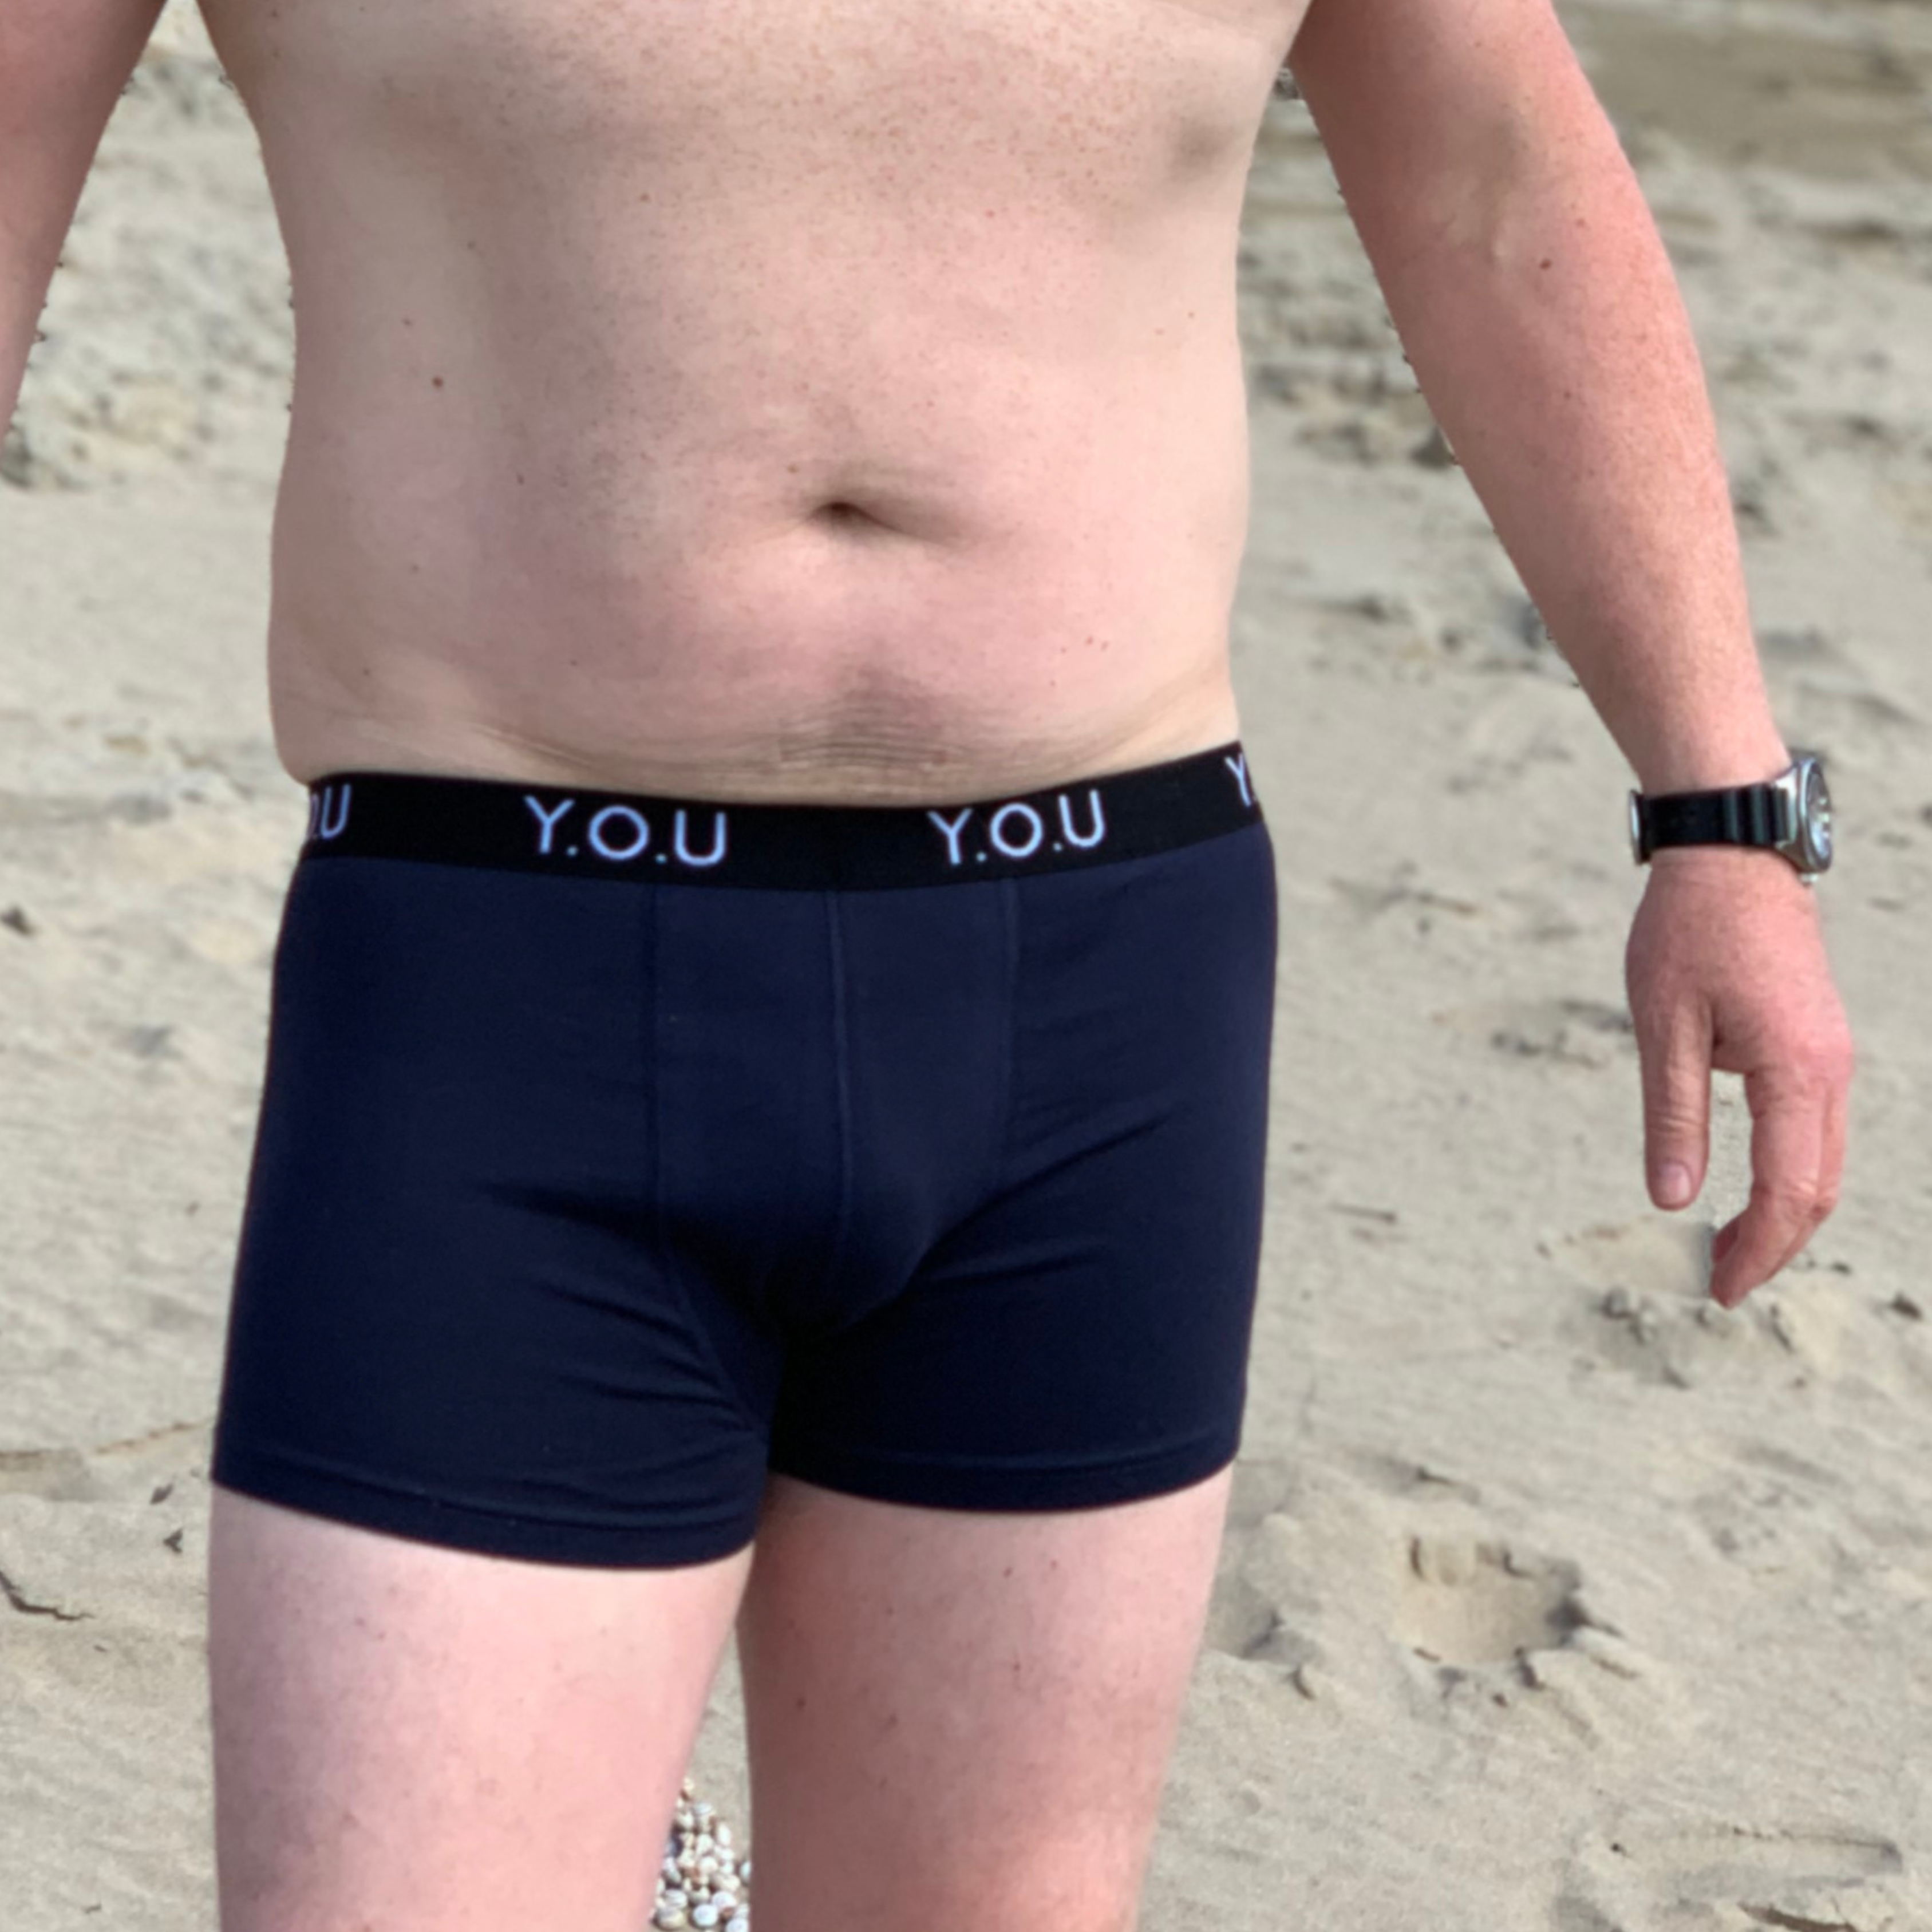 A man with a light complexion wearing navy blue men’s hipster trunks and a watch on his left wrist stands on a sandy beach. The waistband of the trunks has "Y.O.U" written repeatedly, In the background, sand and pebbles are visible but indistinct.